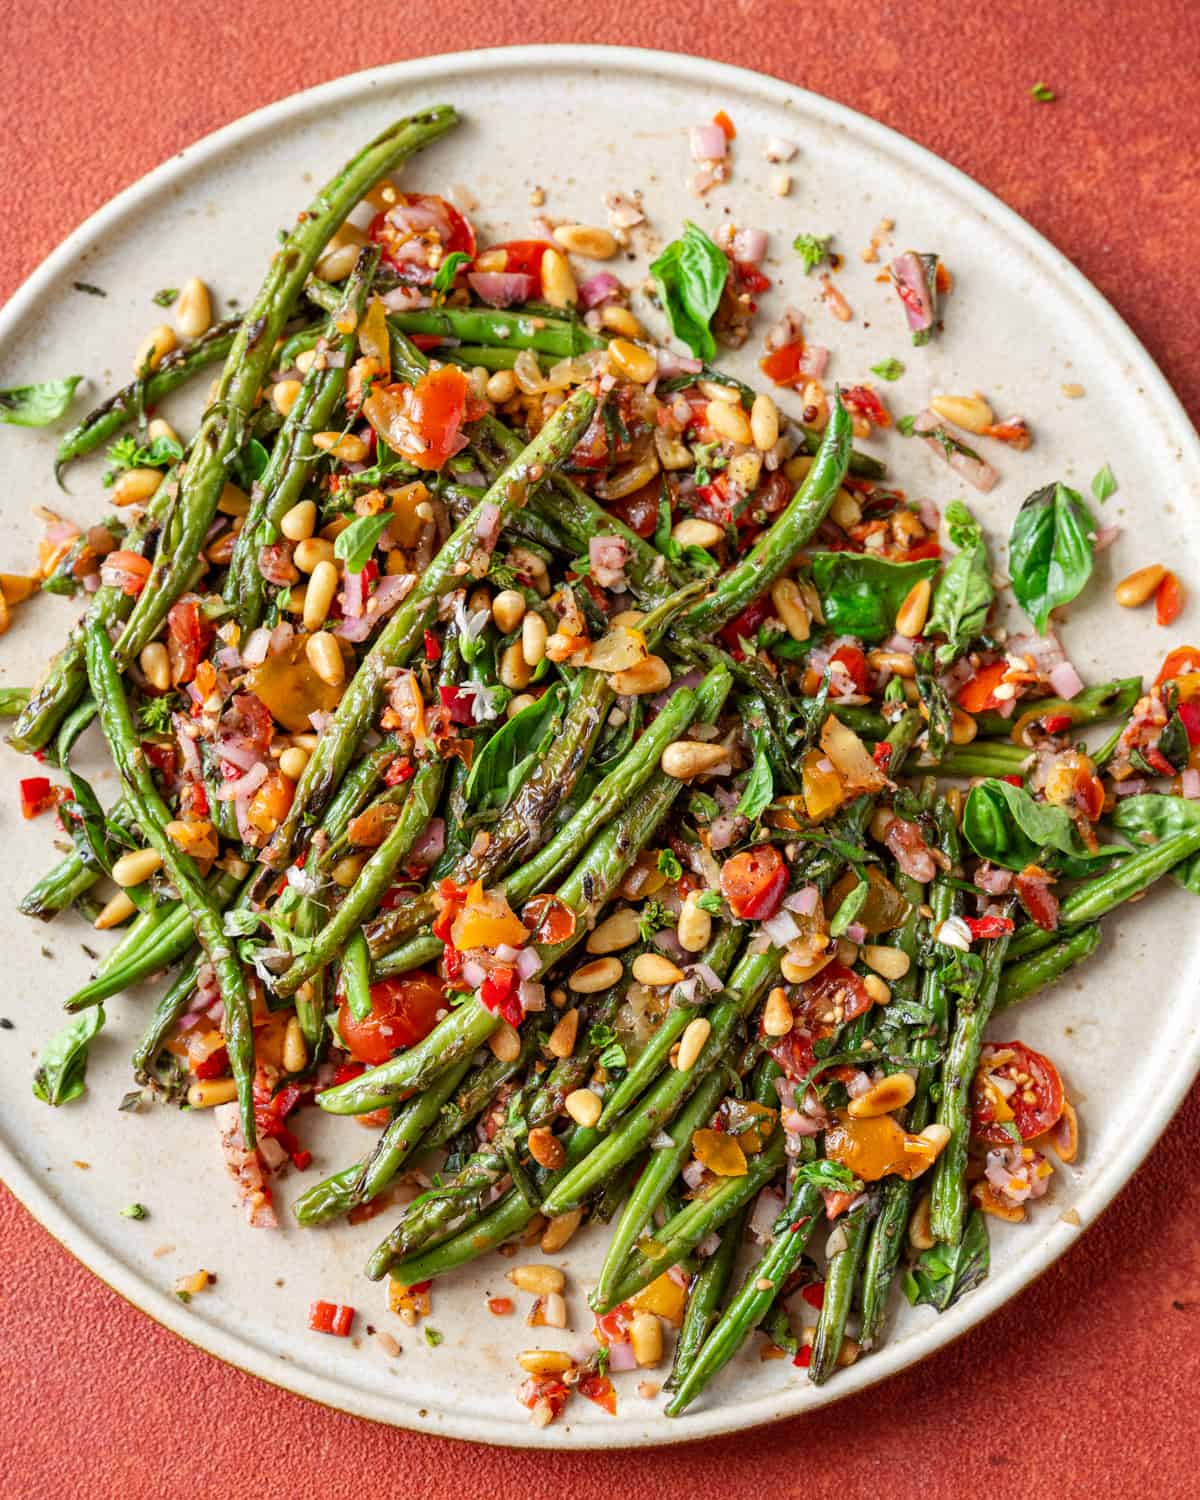 Charred green beans served on a plate.